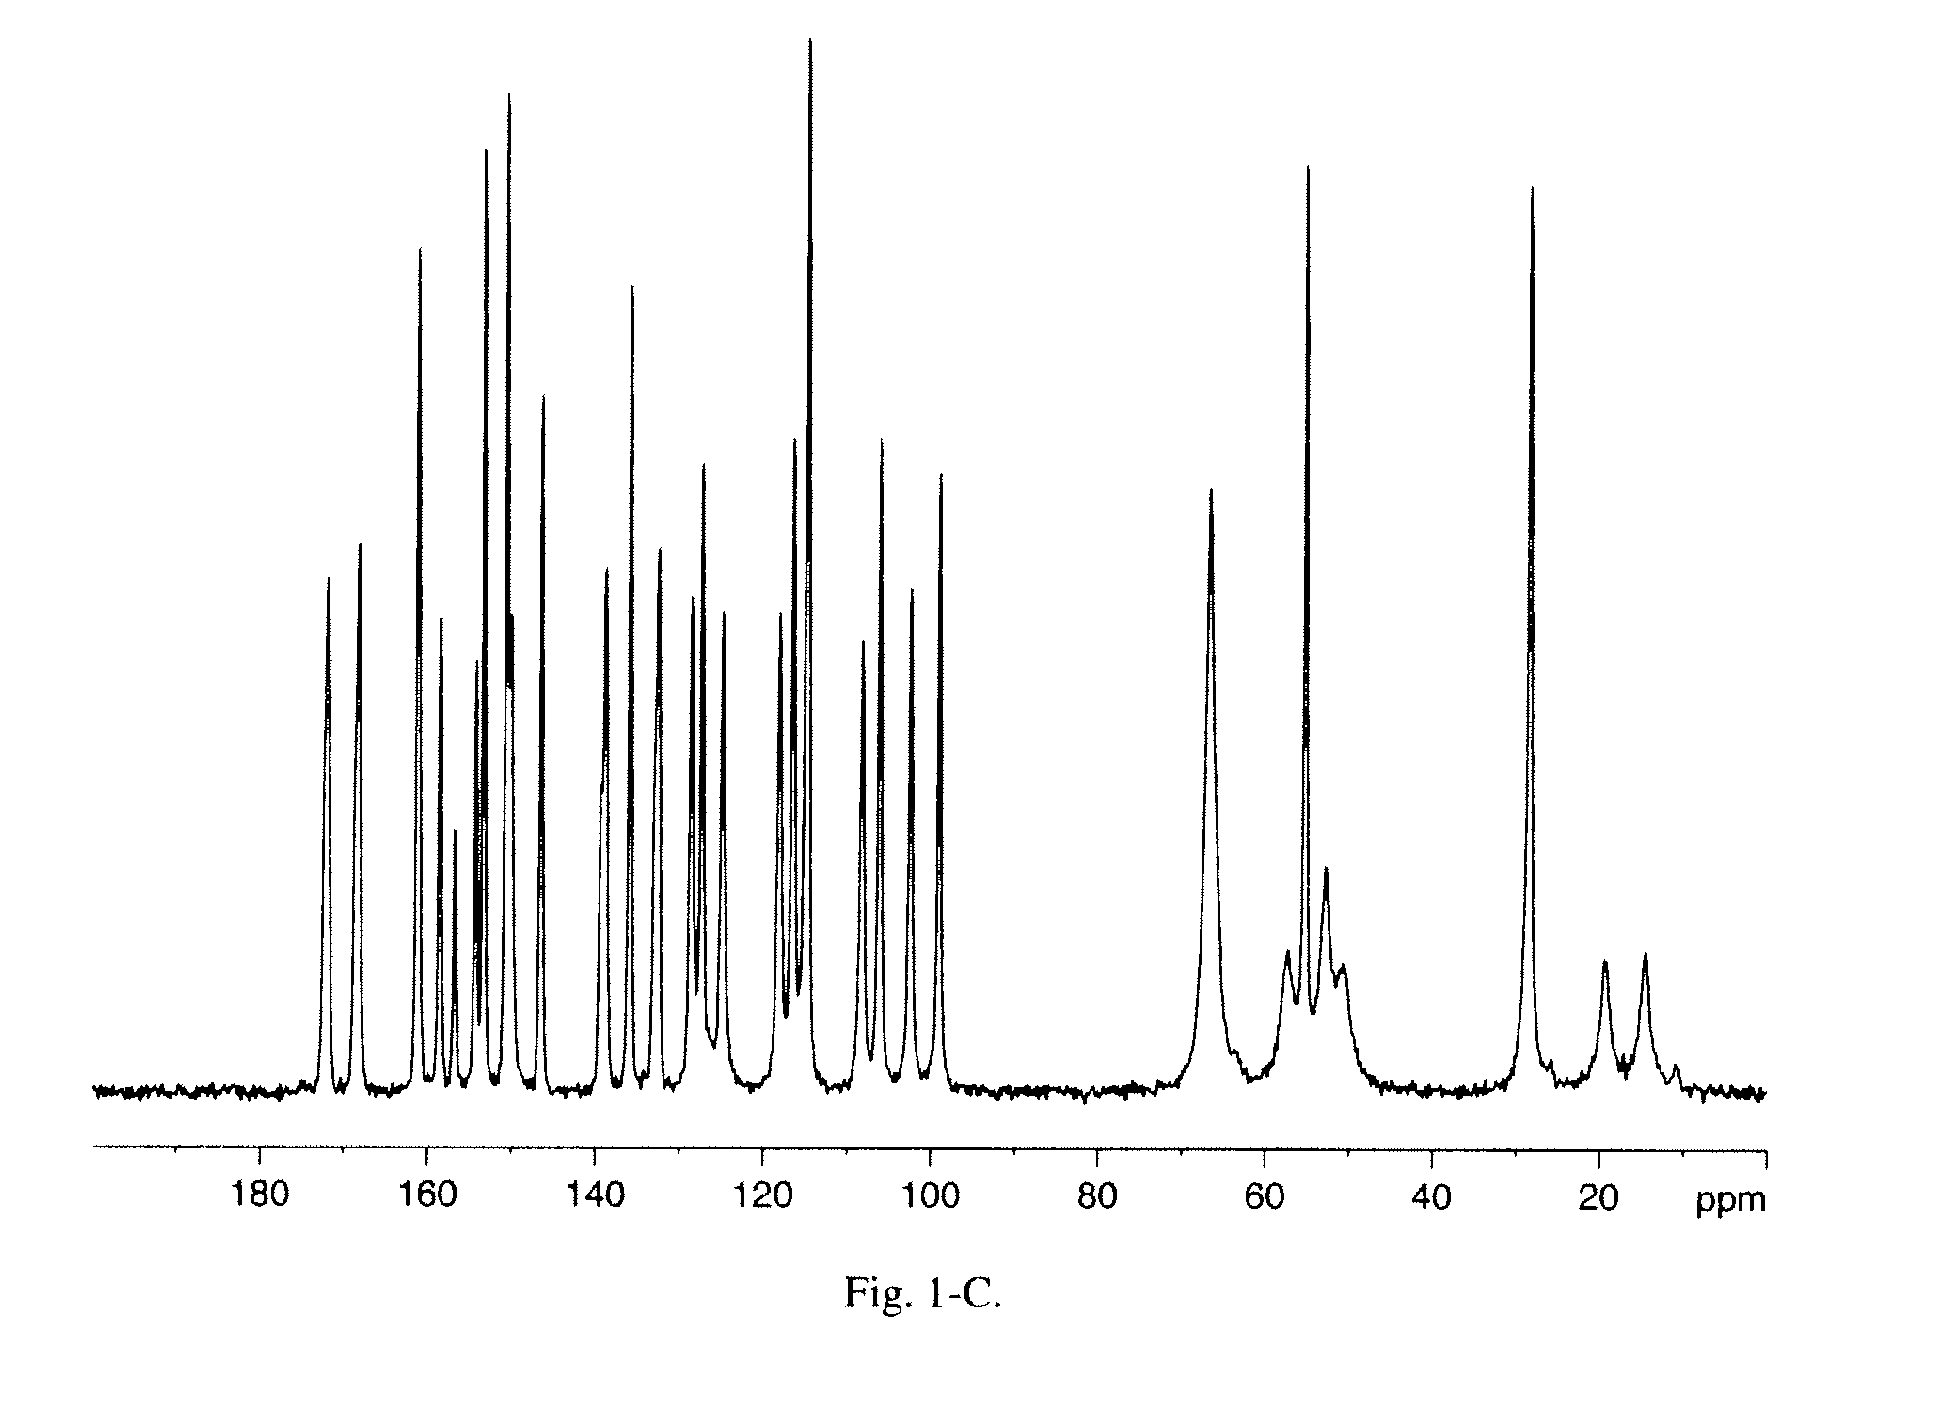 Crystalline Forms on N-[3-fluoro-4-({6-(methyloxy)-7-[(3-morpholin-4-ylpropyl)oxy]-quinolin-4-yl}oxy)phenyl]-N'-(4-fluorophenyl)cyclopropane-1,1-dicarboxamide